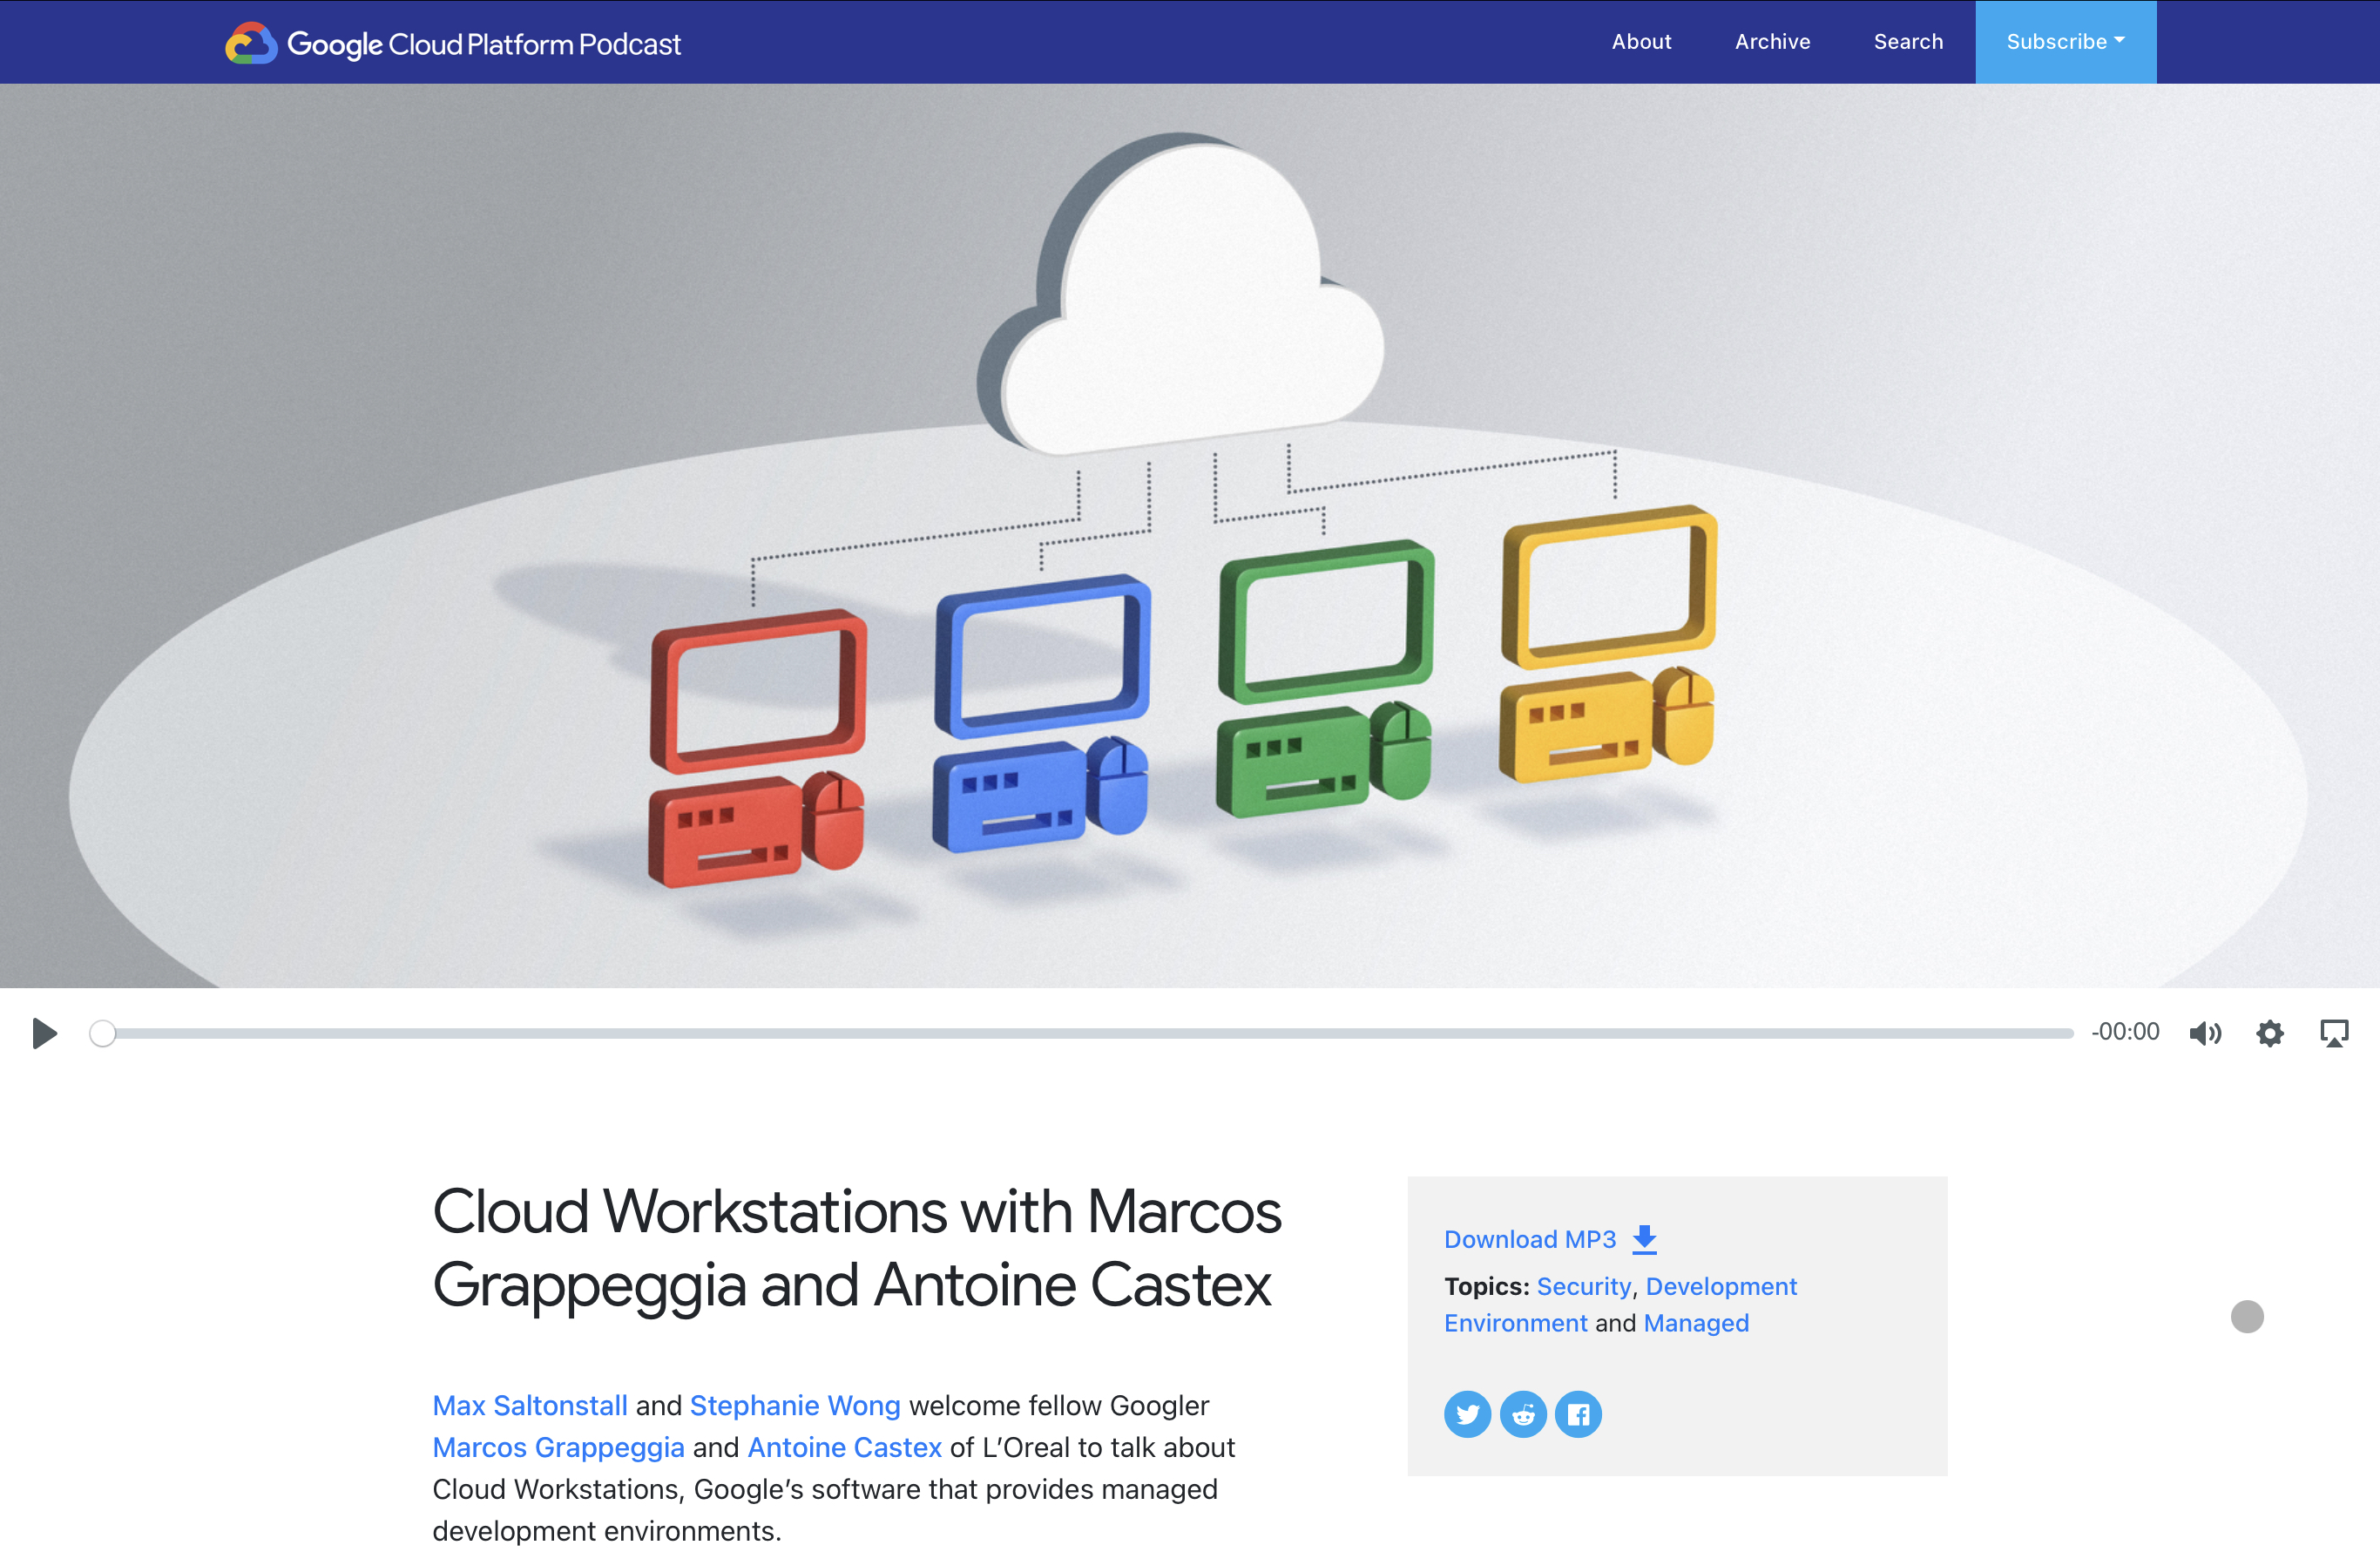 GCP: Cloud Workstations with Marcos Grappeggia and Antoine Castex